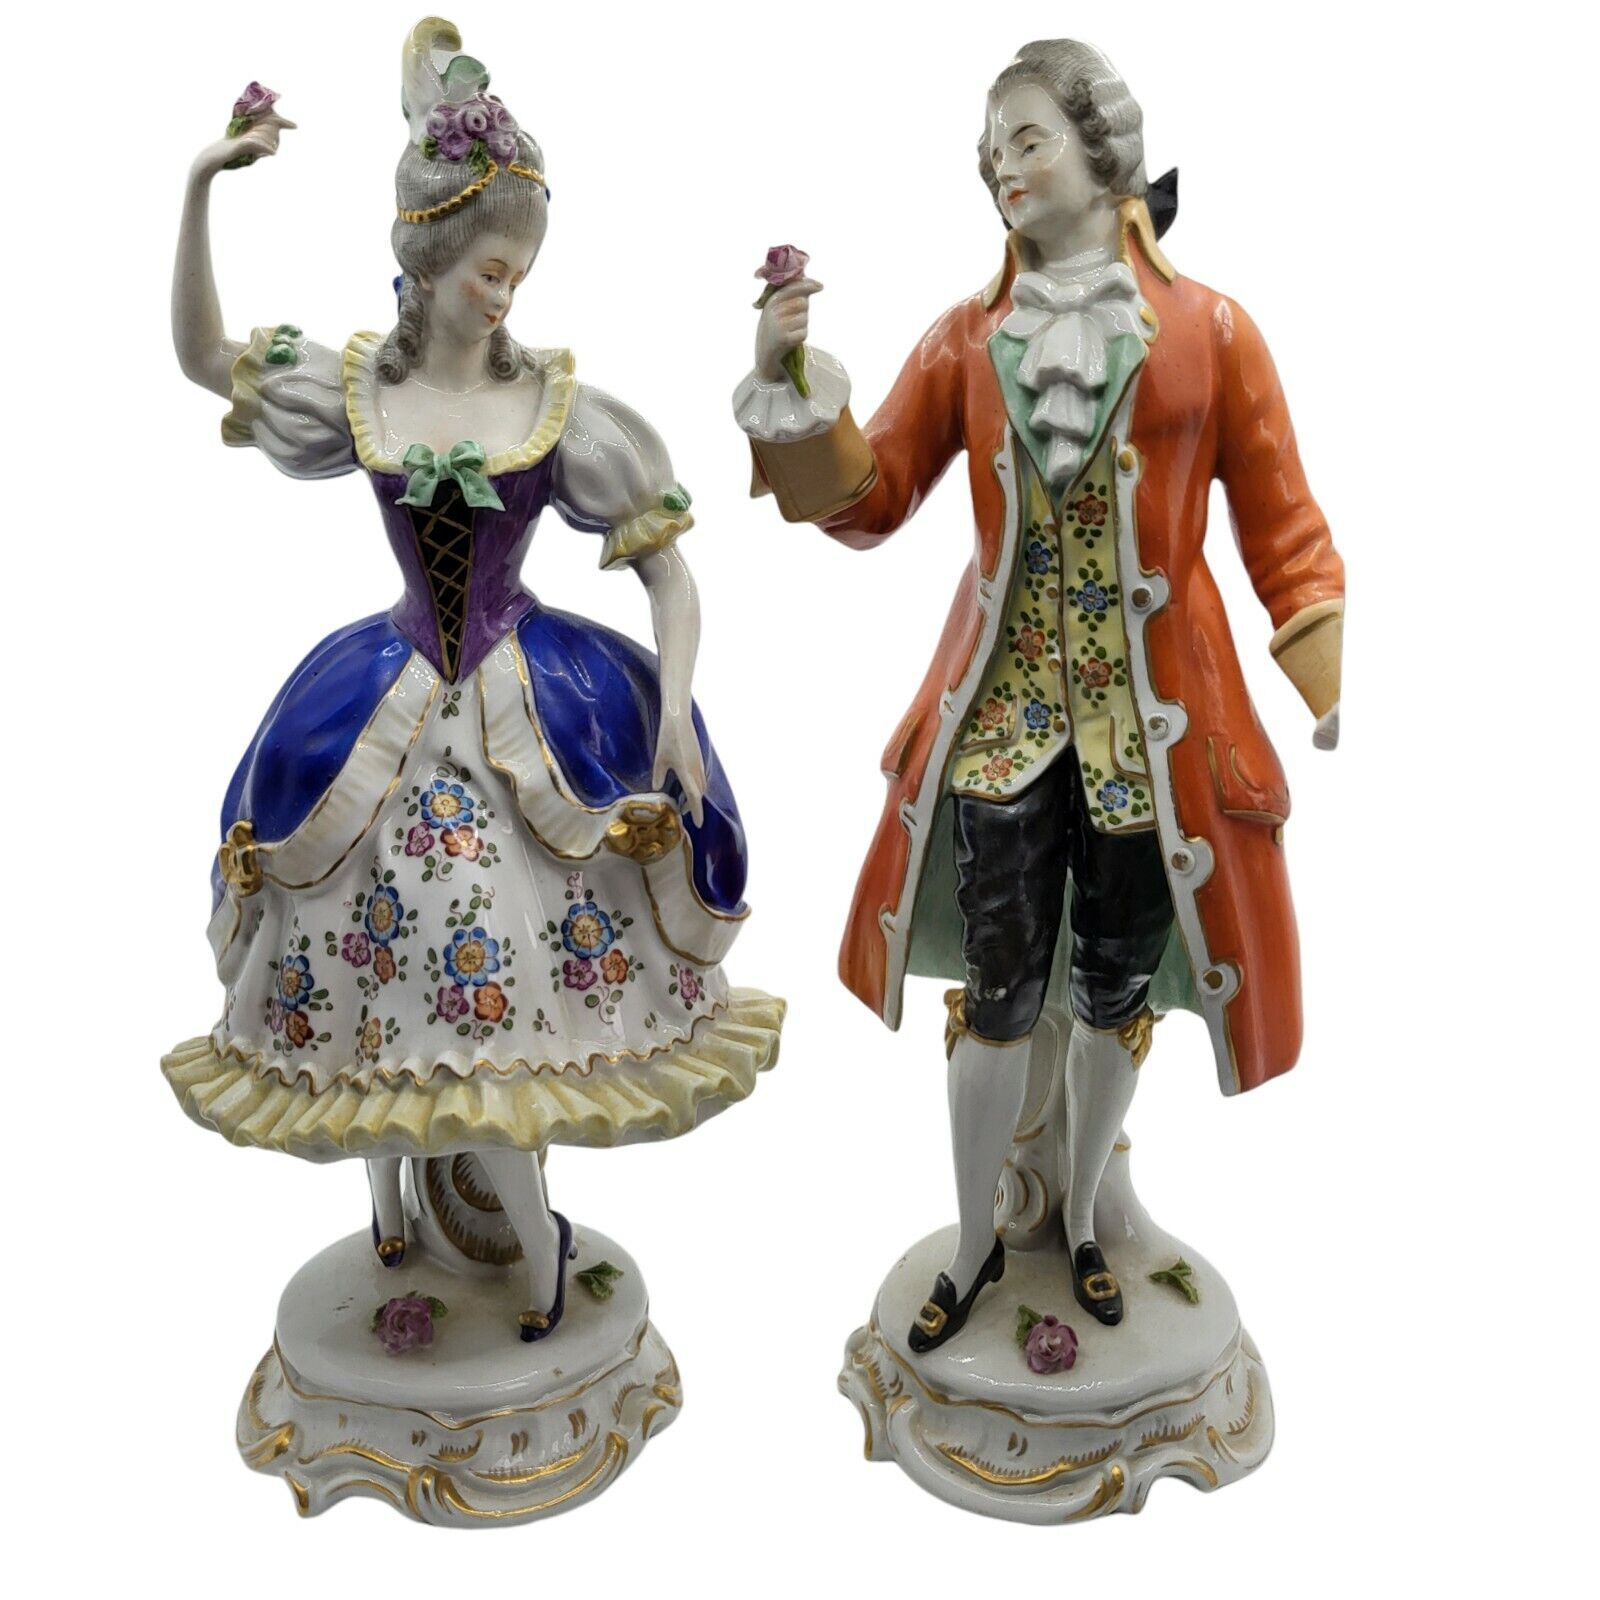 Scheibe Alsbach Kister German Hand Painted Porcelain Dancing Rose Figurine Pair